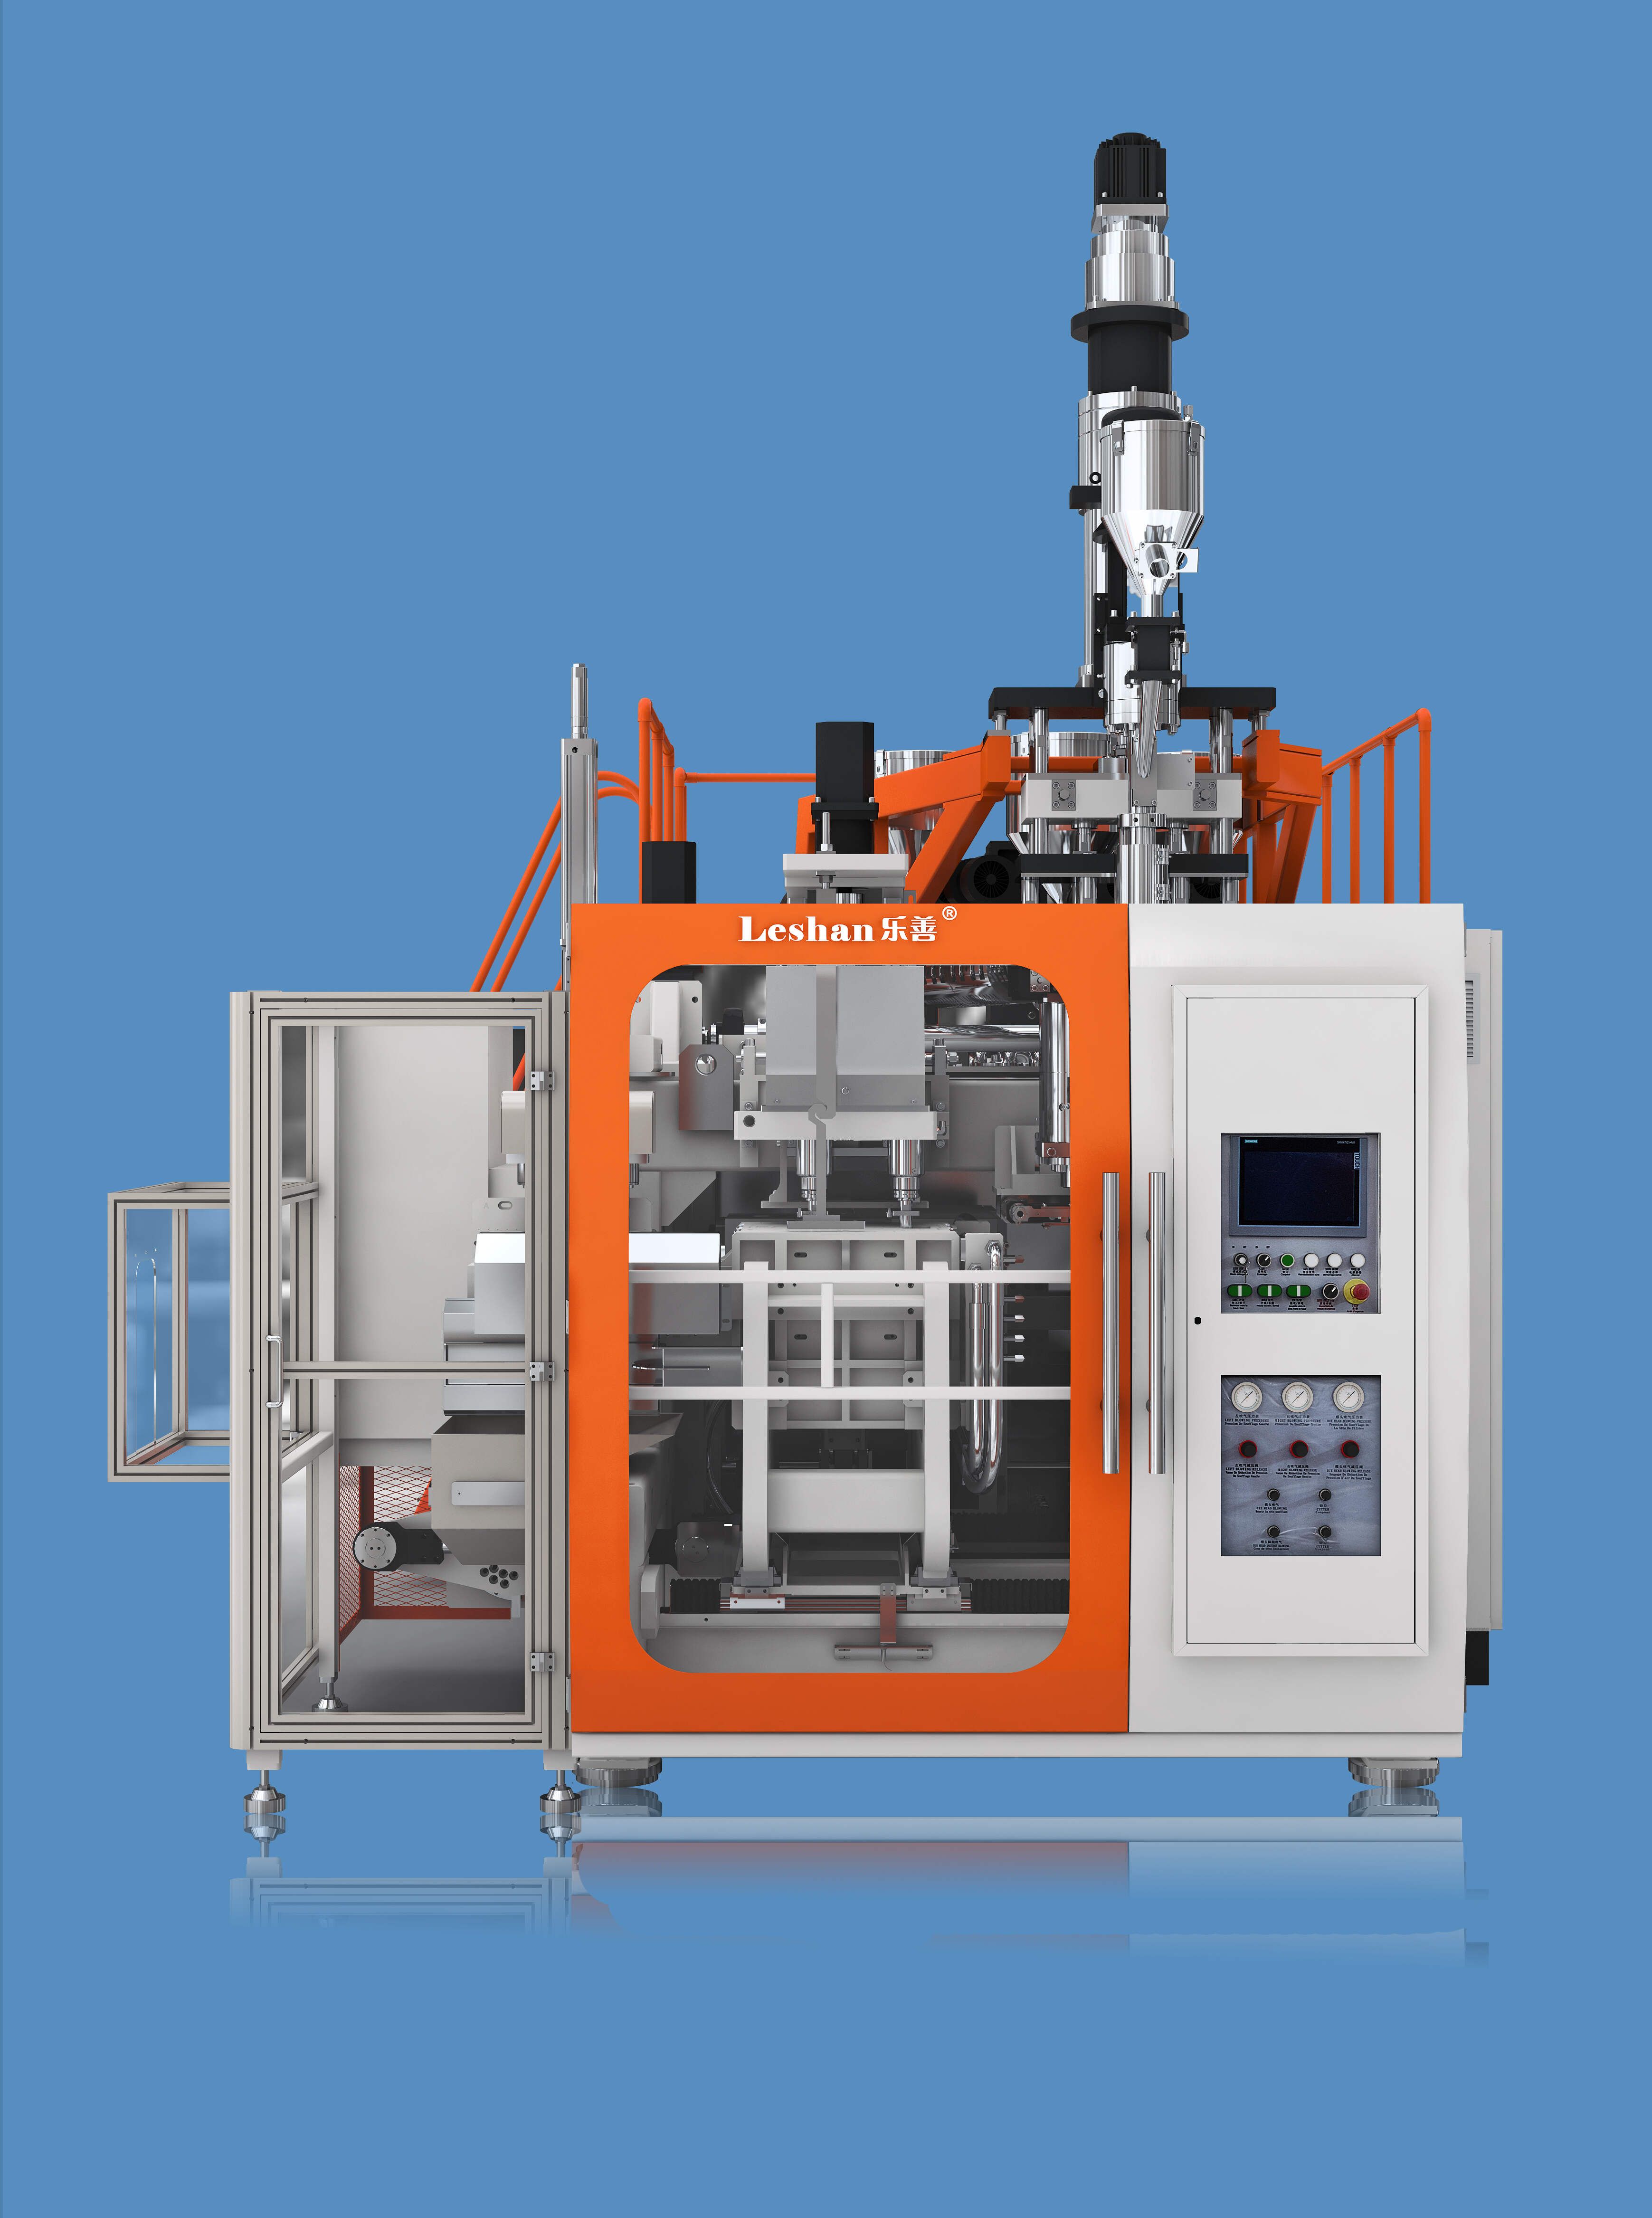 What are the key components of a 5 gallon pc bottle blow molding machine?